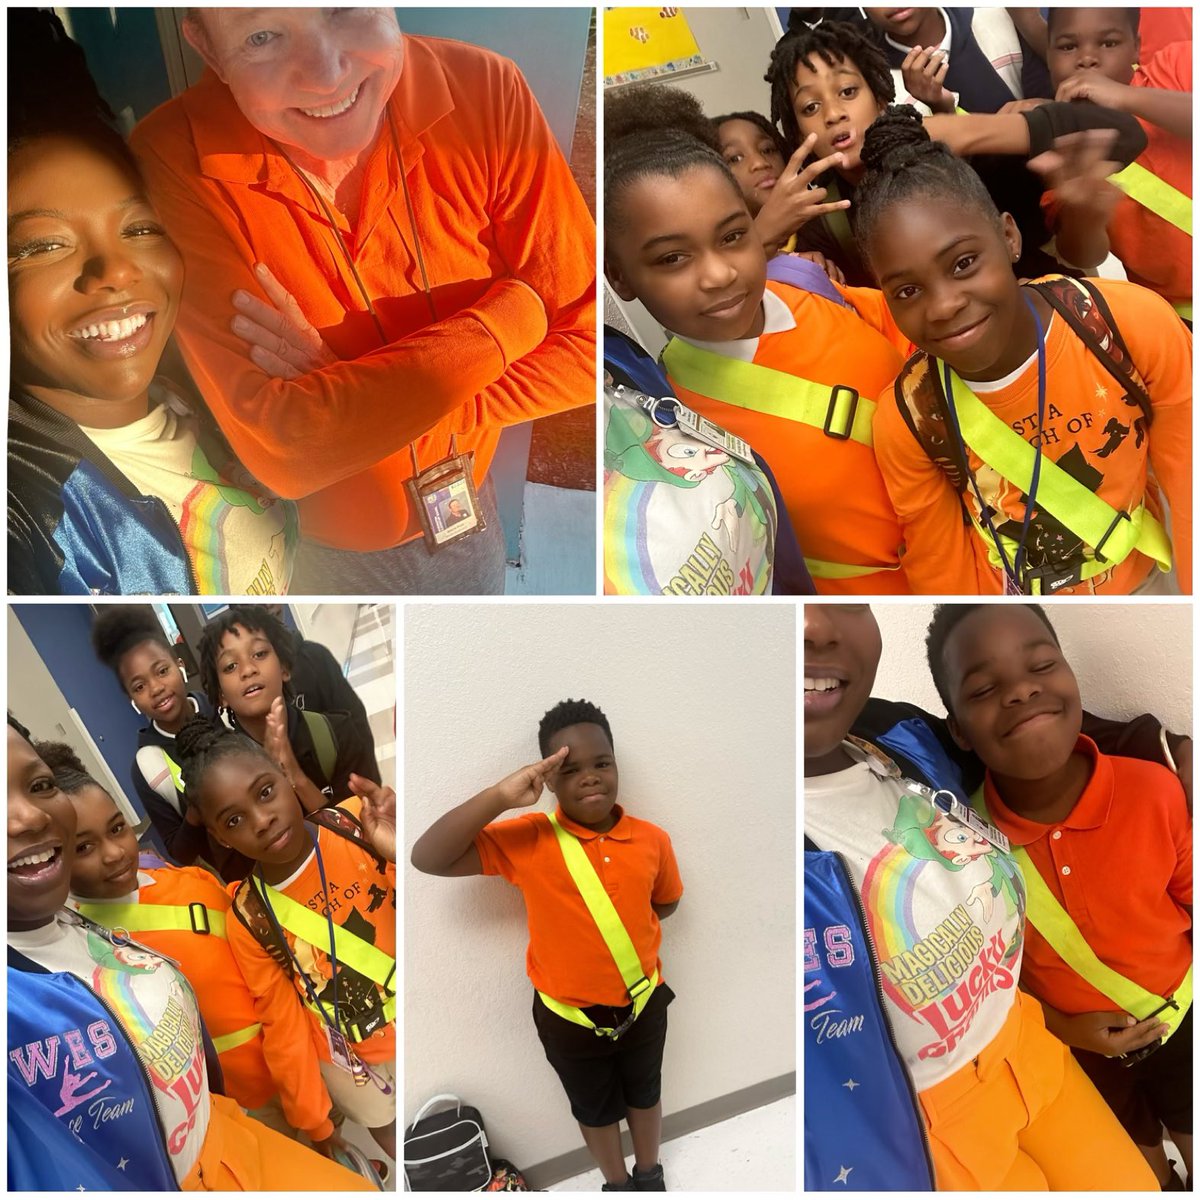 🧡 orangeStood Up Against Bullying: Wore orange for Unity Day! Together, we sent a powerful message of solidarity and support. #UnityDay #BullyingPreventionMonth 🧡🧡